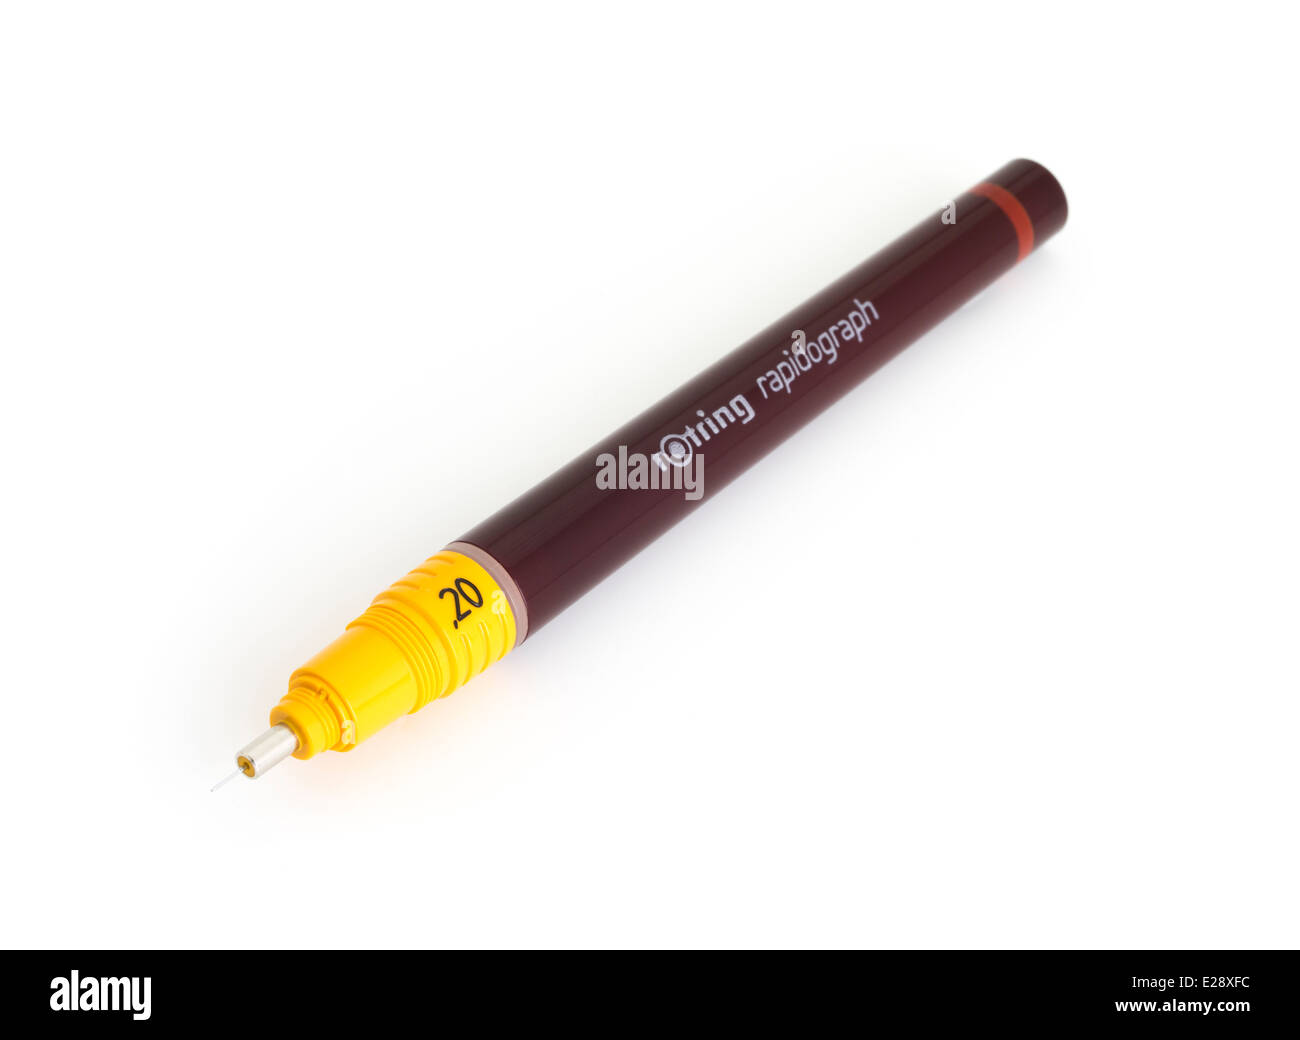 Rotoring Rapidograph technical writing and drawing pen / stylograph. Stock Photo